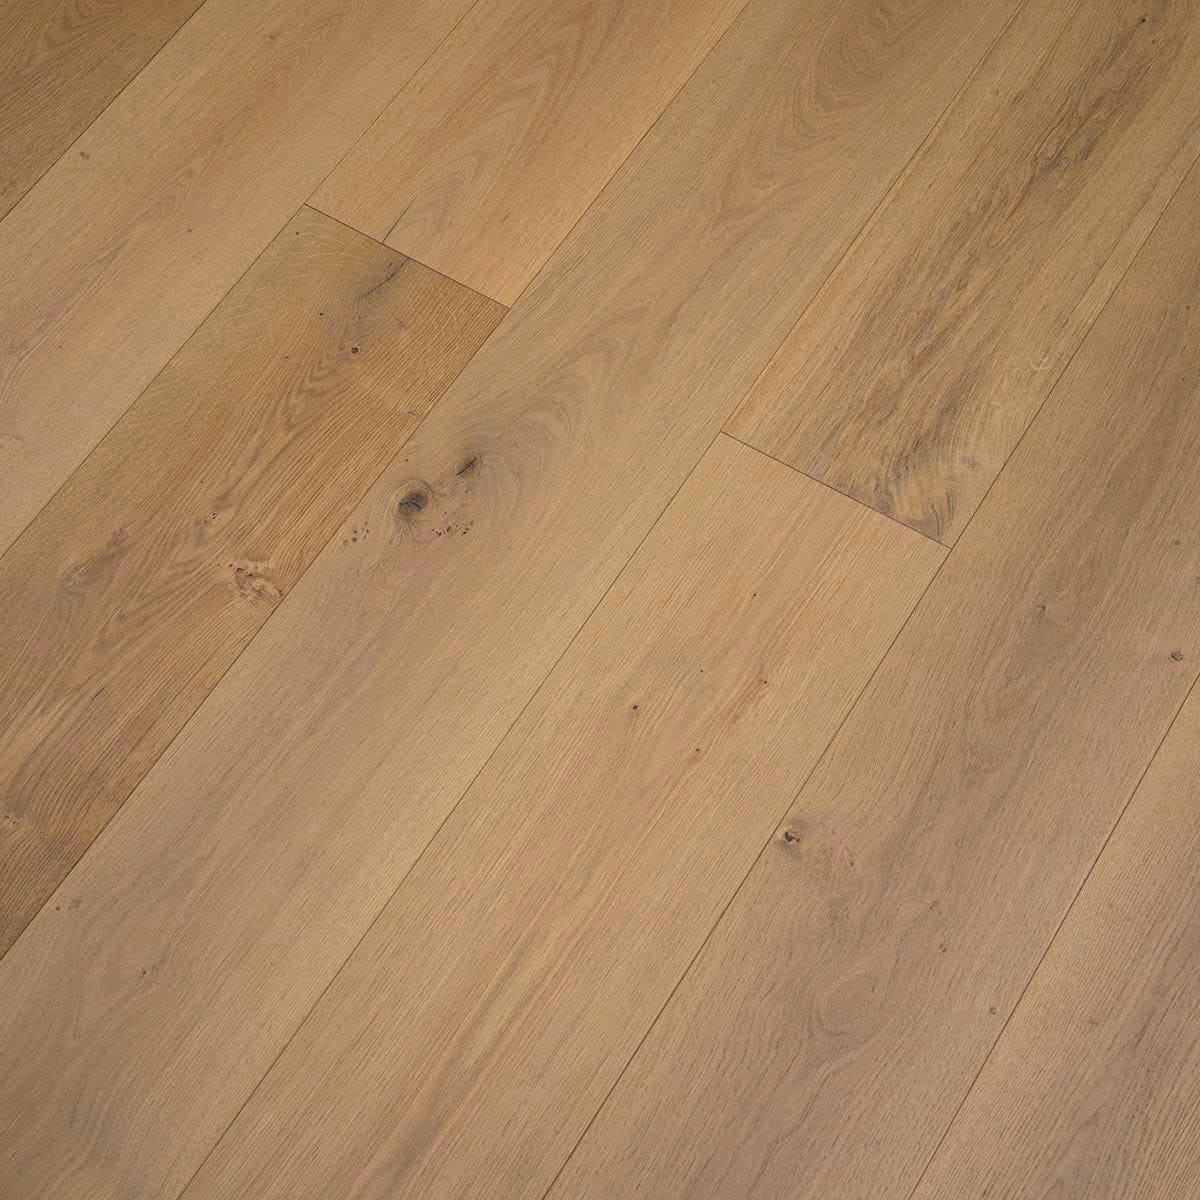 Hyperion Tiles Engineered Flooring 190 x 1900 x 14mm 2.166m2 per pack DC203 White Smoked Oak